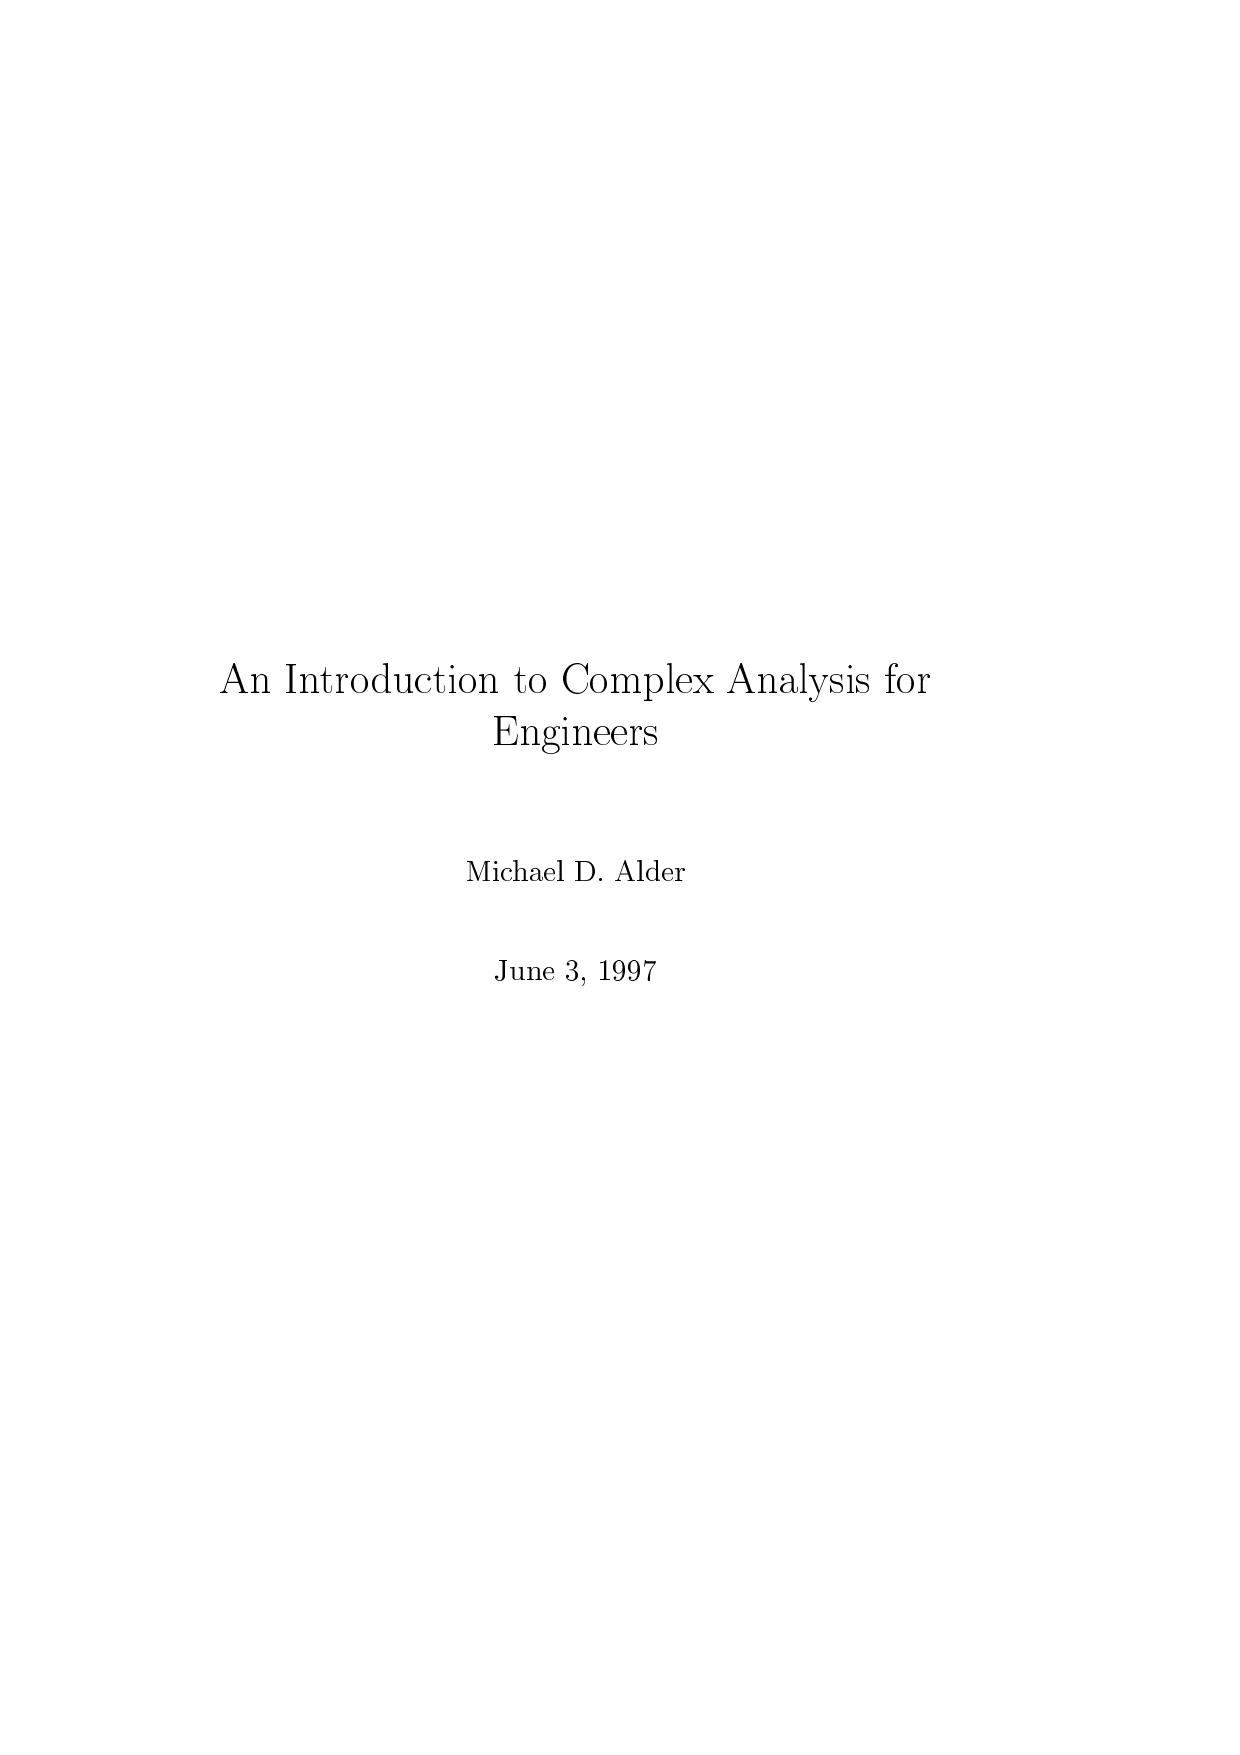 Intro-Complex-Analysis-for-Engineers 1997